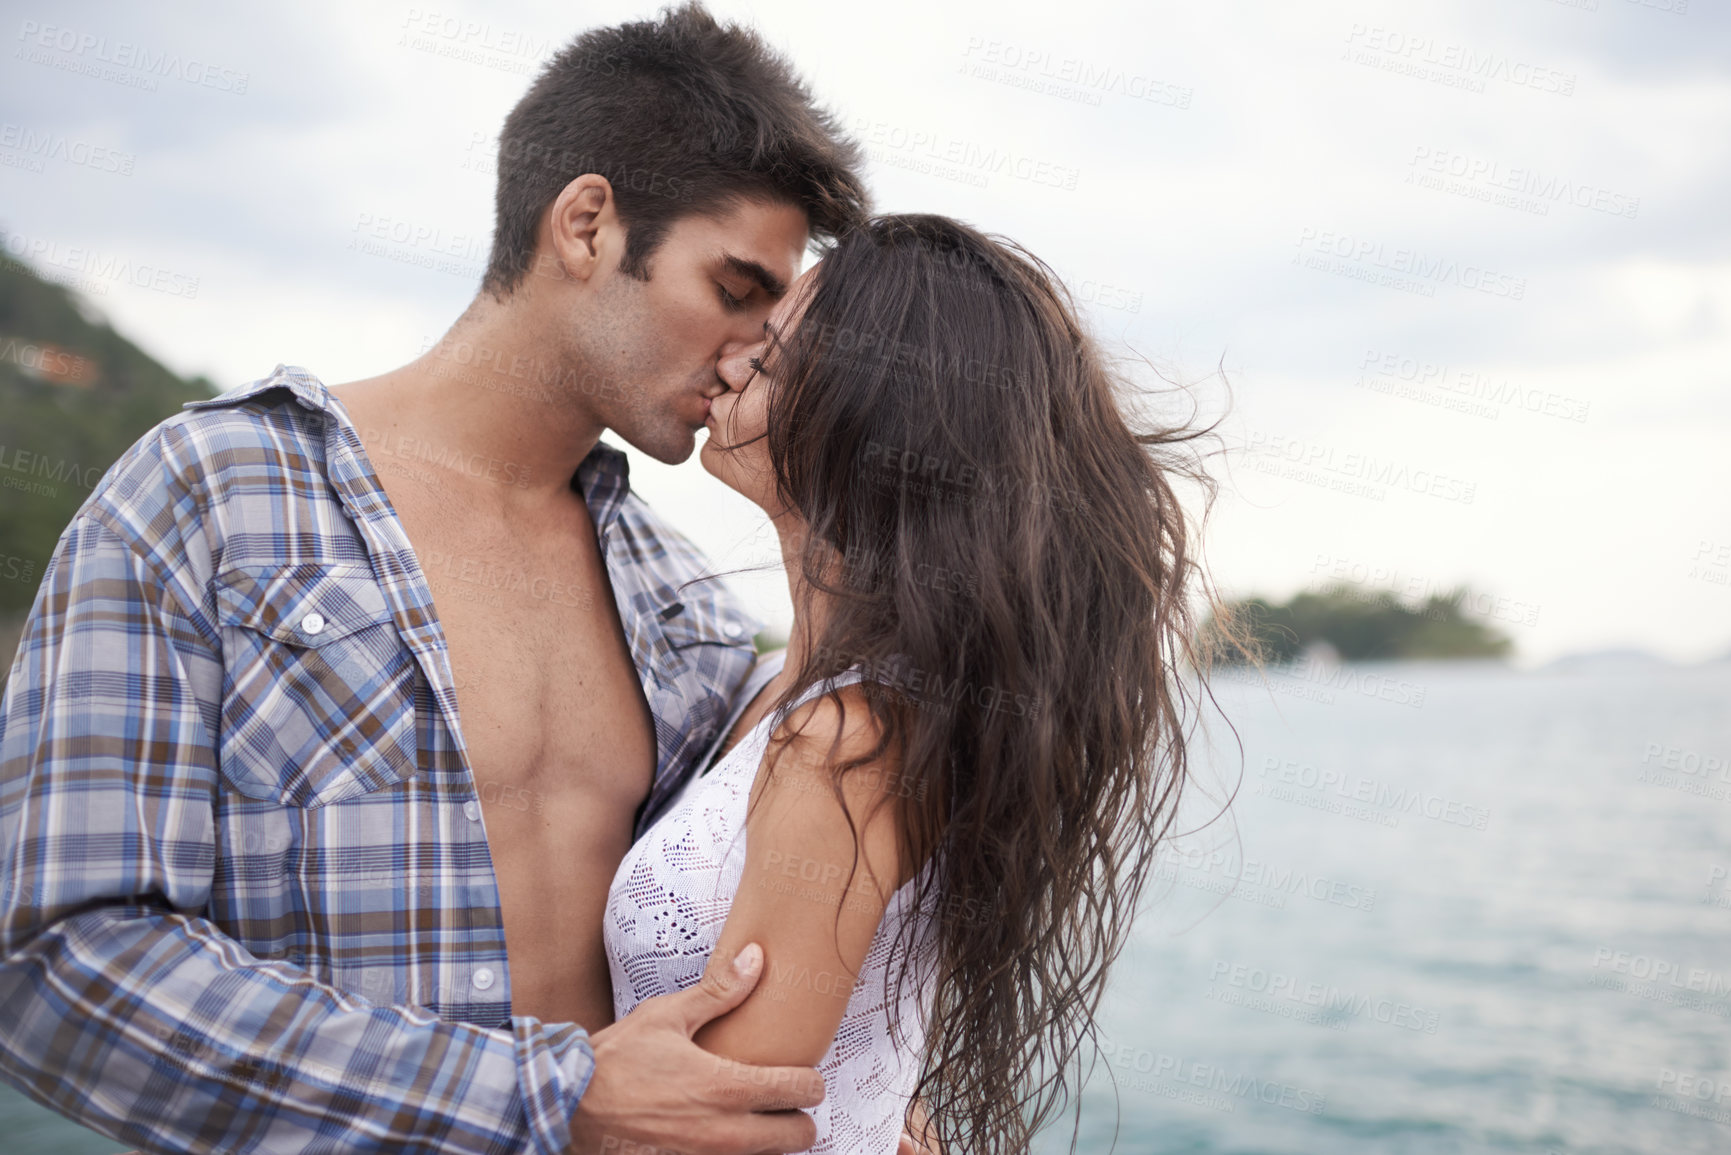 Buy stock photo Shot of an intimate young couple enjoying a kiss by the water's edge